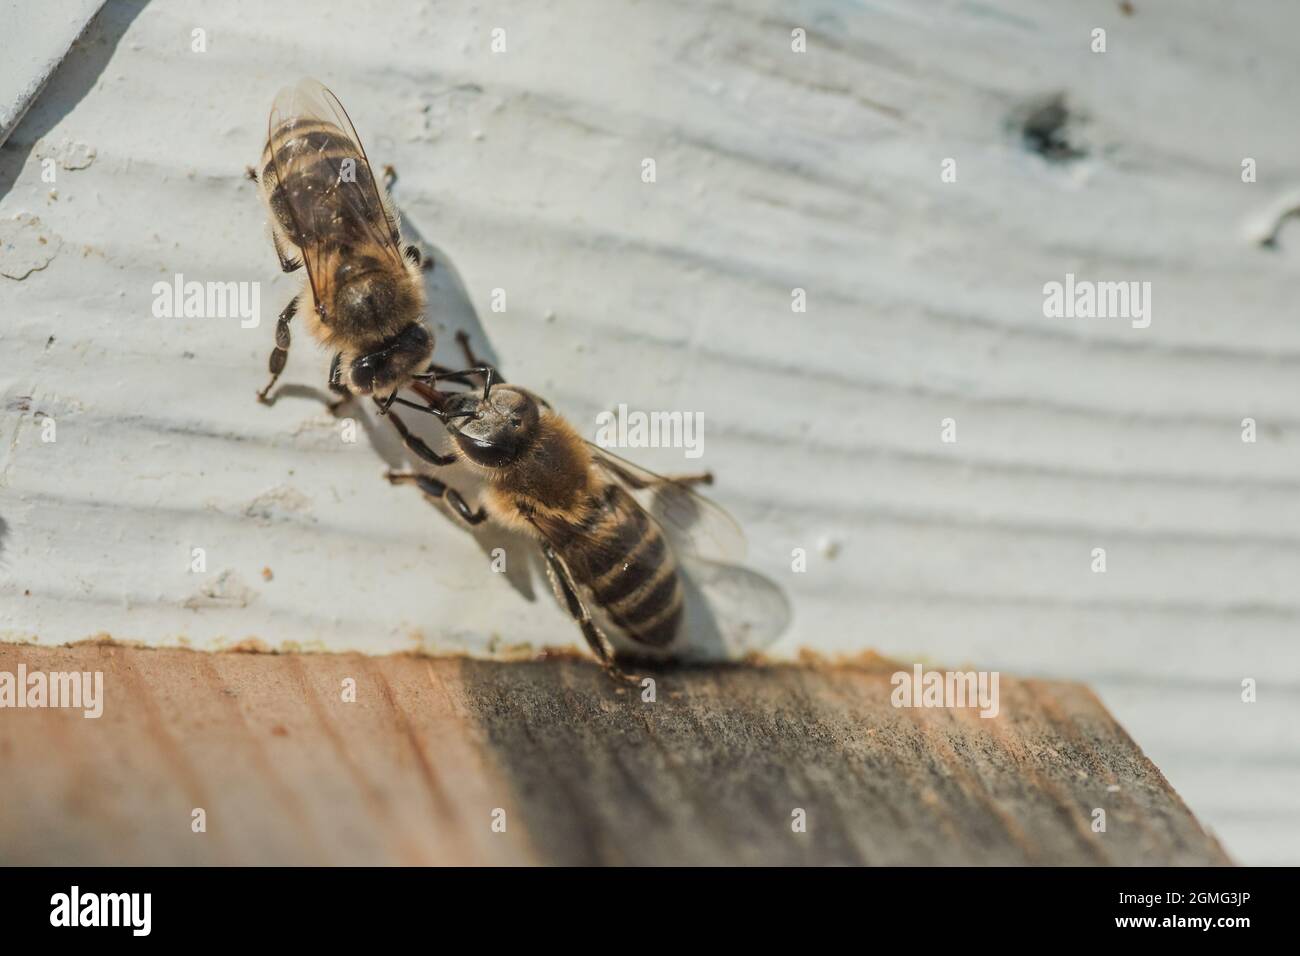 Two bees transmit information near the fly. Bees touch the tongues. bees return to the beehive after the honeyflow. Bee-guard in beehive entrance. Swa Stock Photo